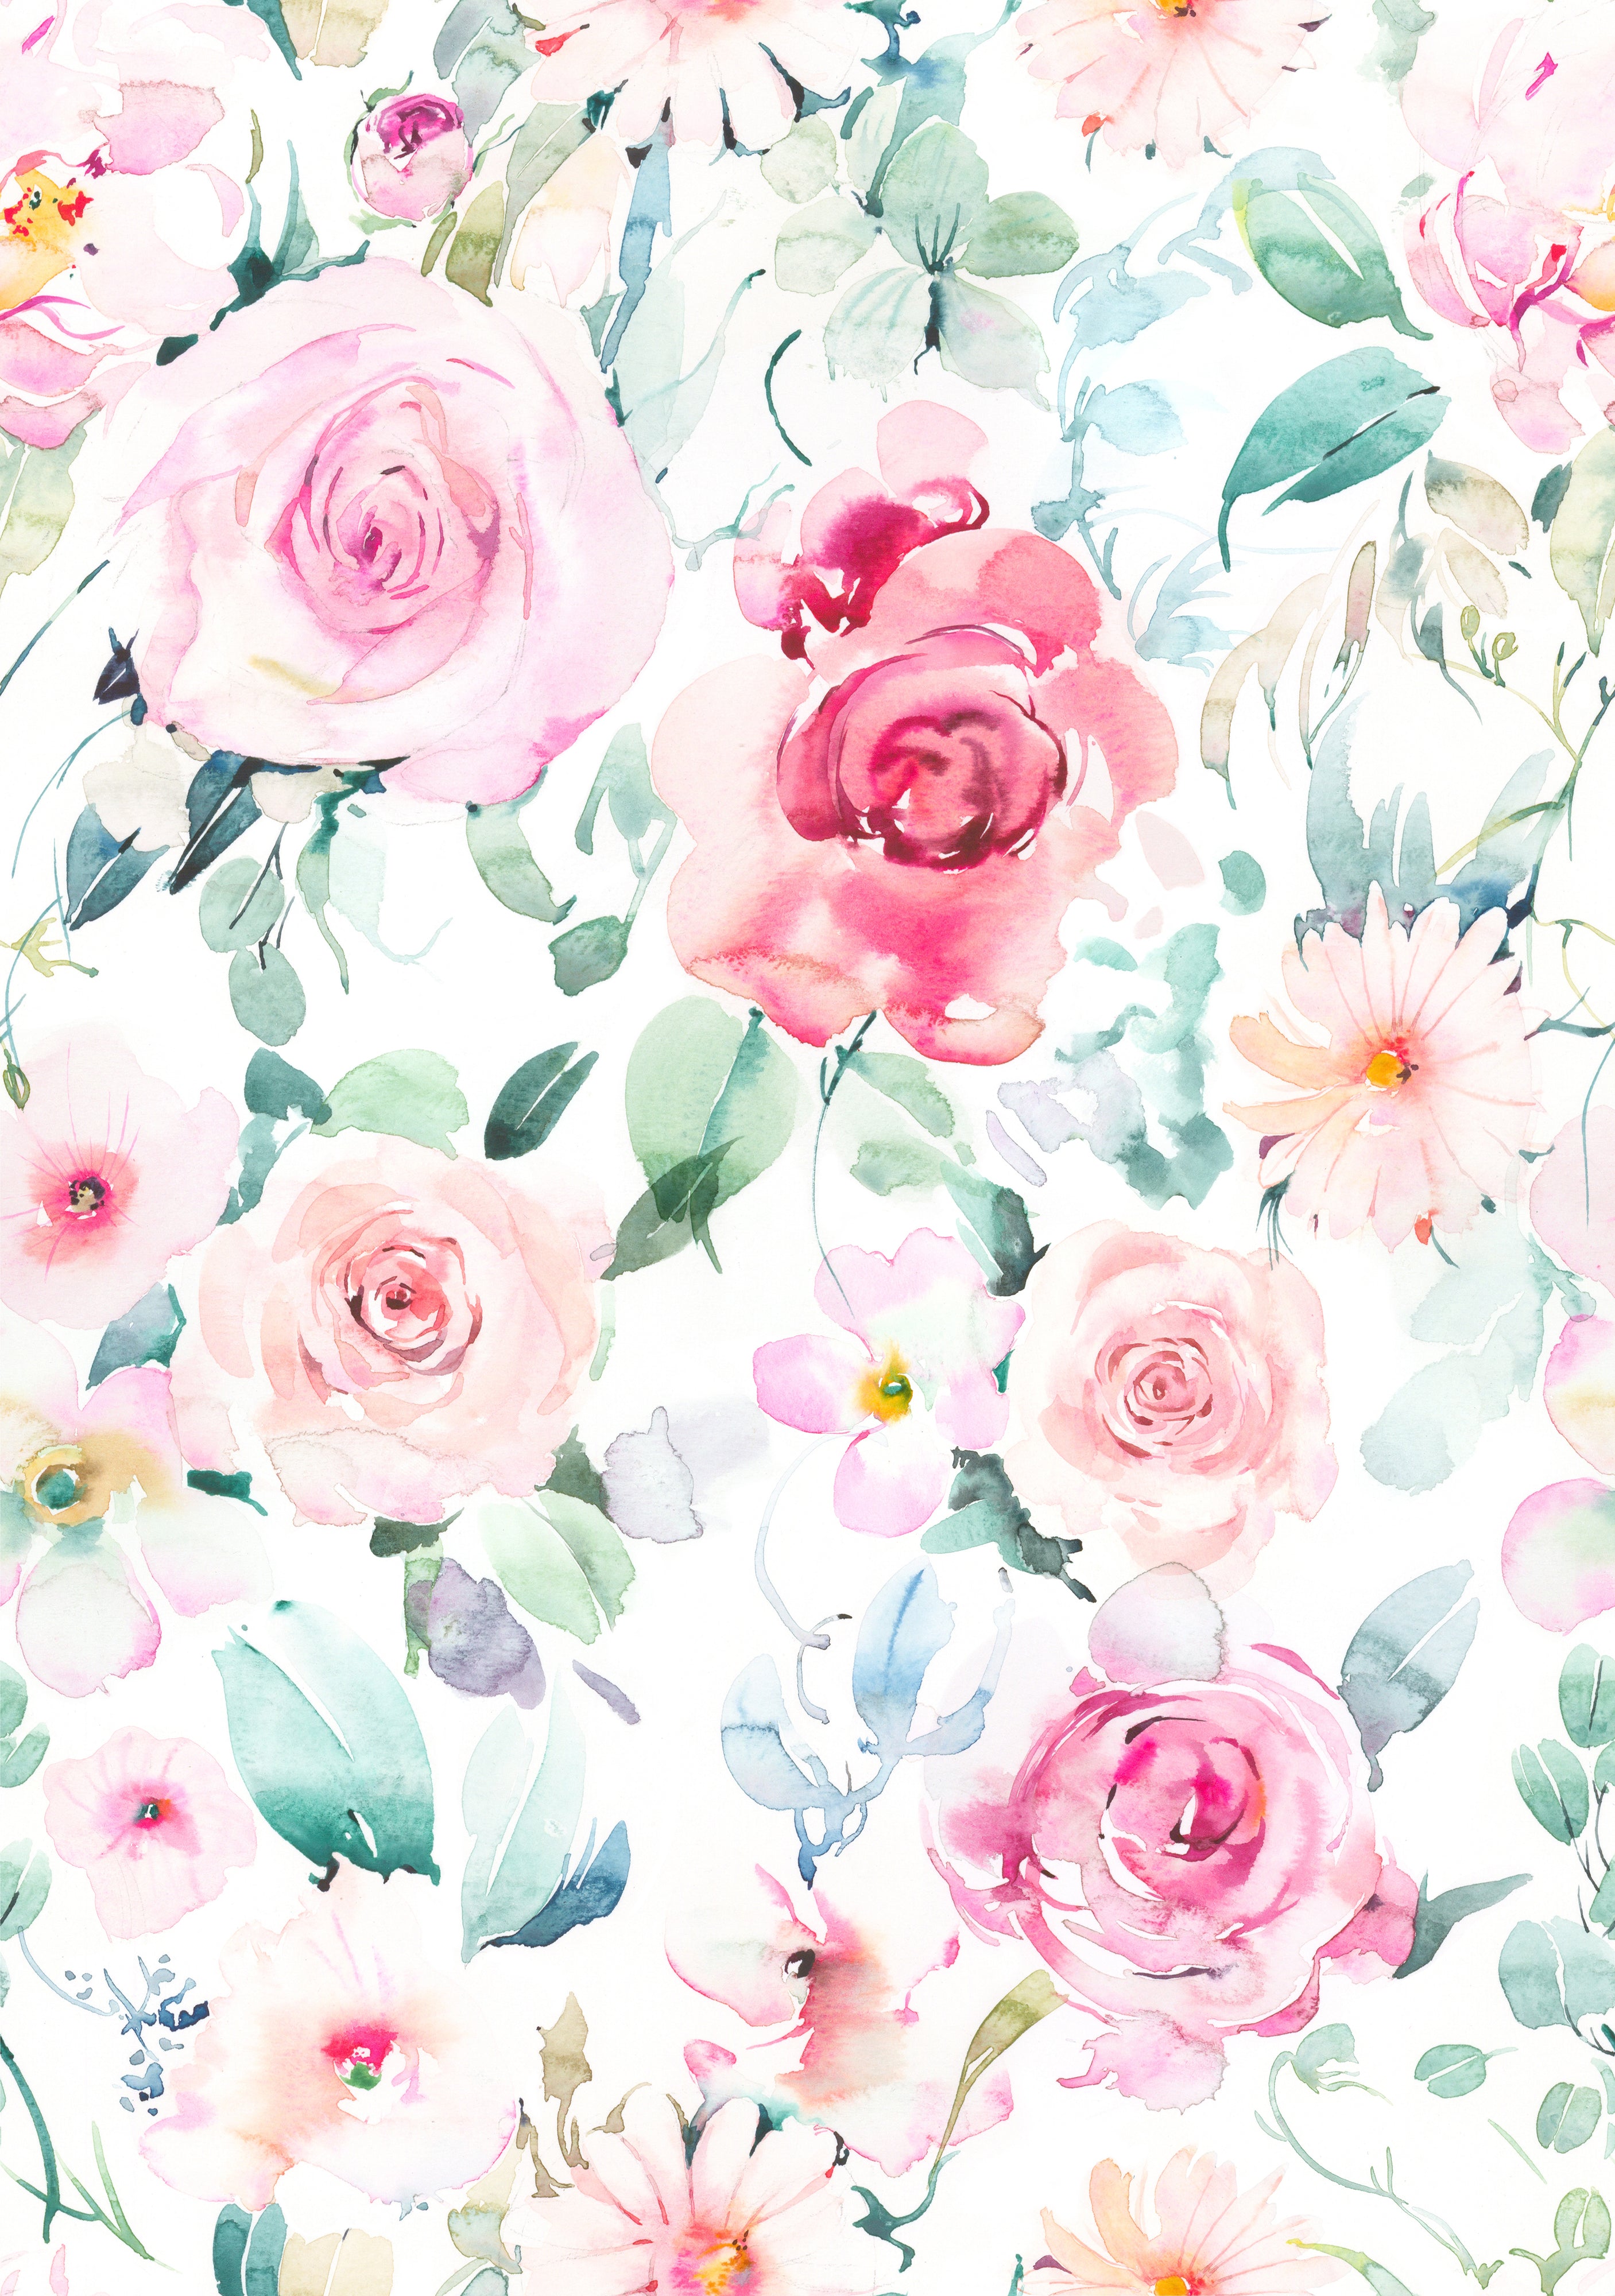 Close-up view of Pink Floral Wallpaper showcasing the delicate watercolor roses and greenery in pink, green, and white tones, highlighting the intricate details of the floral design.